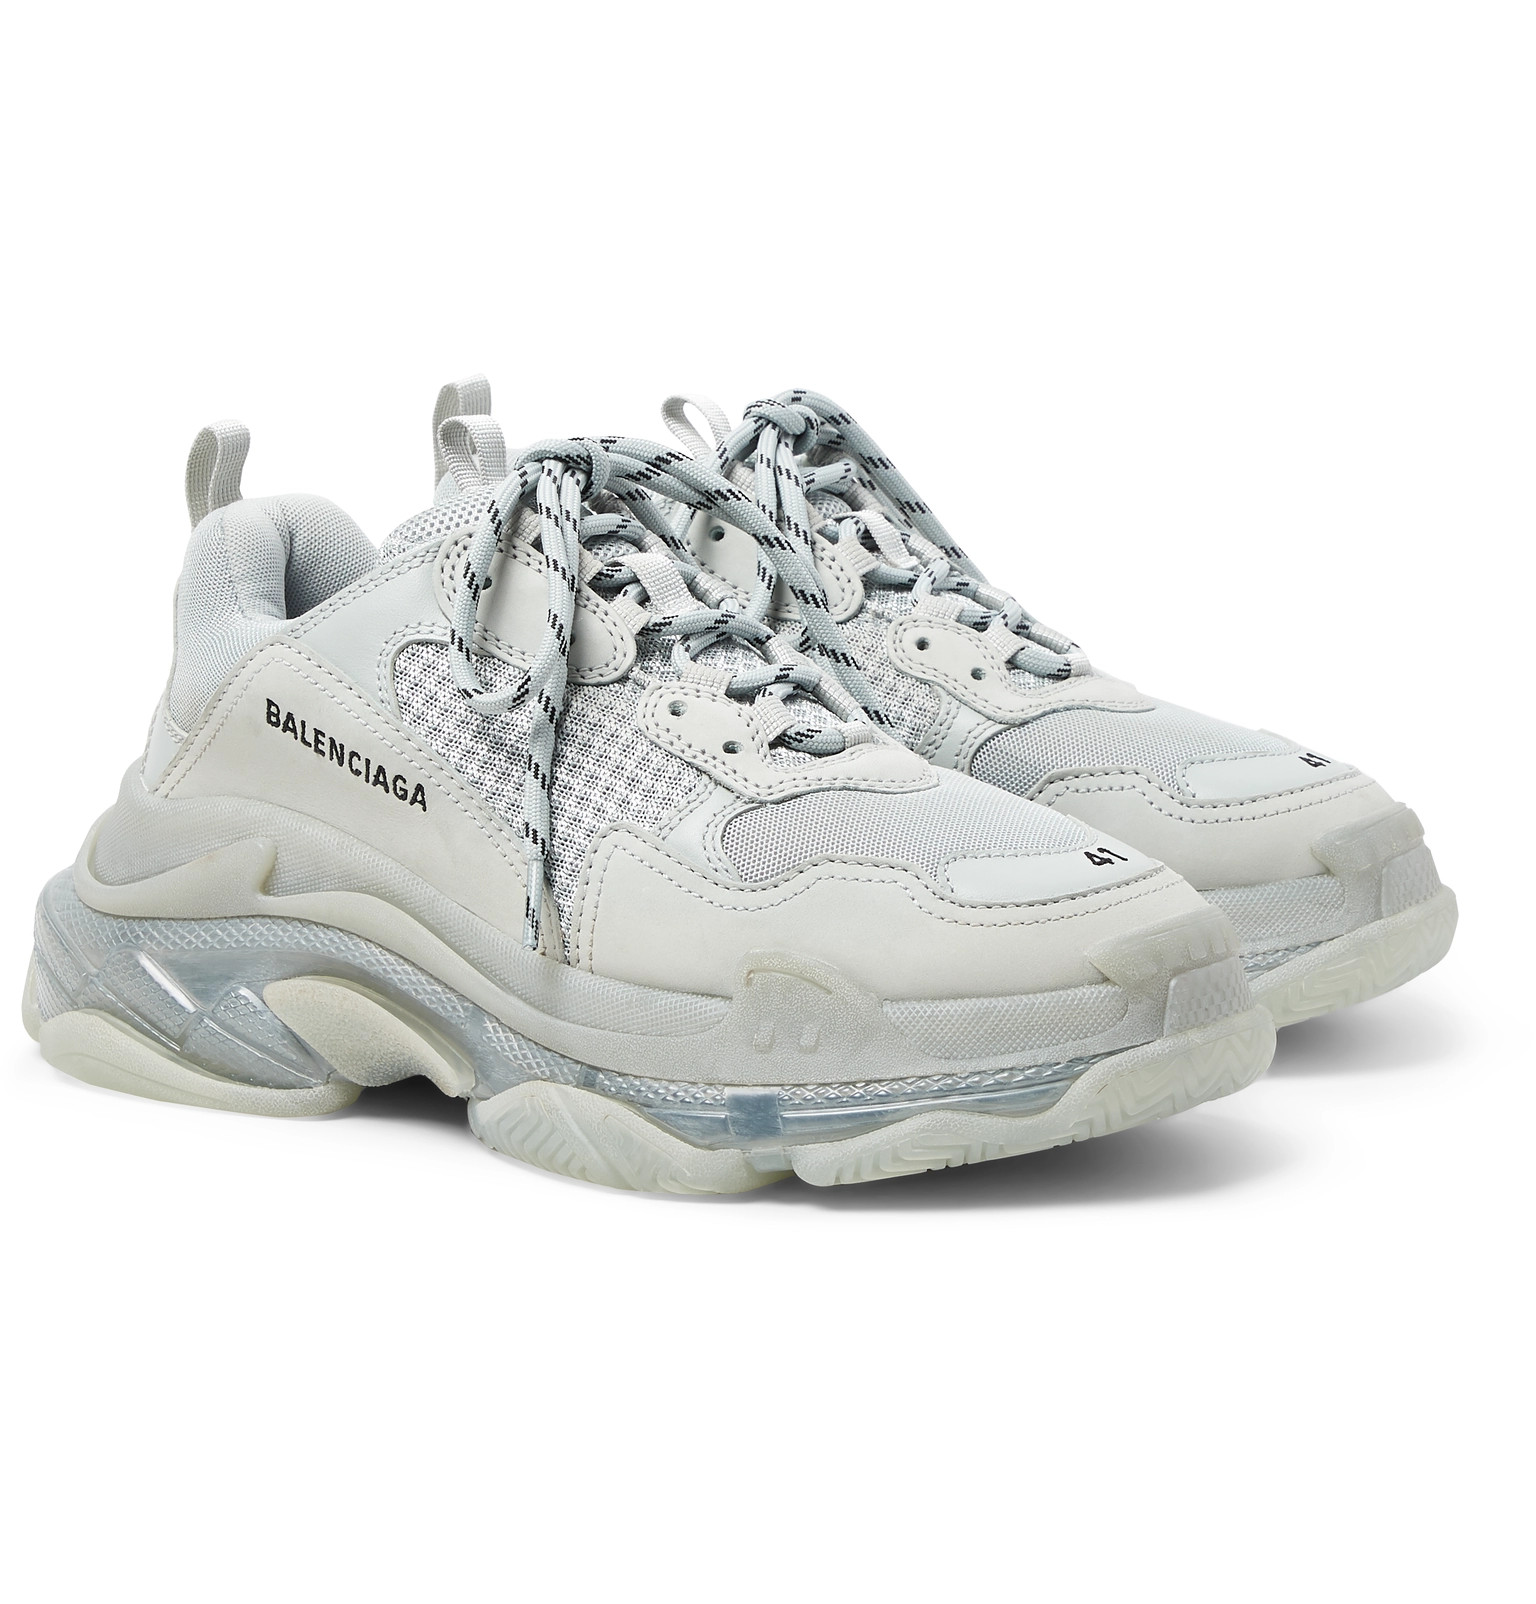 Balenciaga Leather Triple S Sneakers in White Save 10